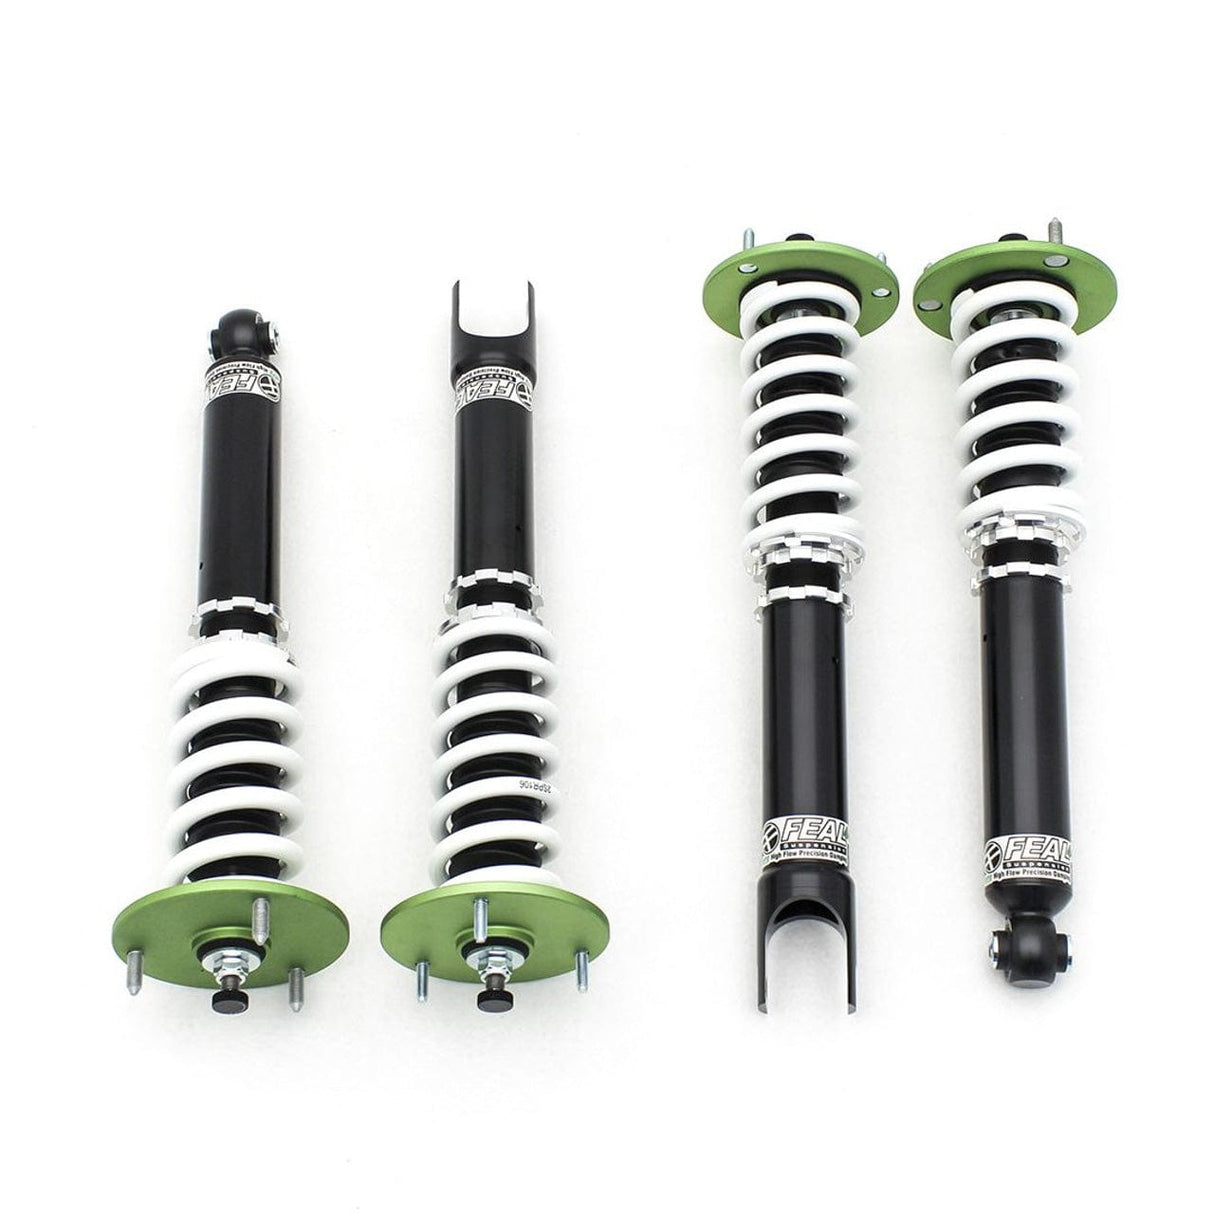 Feal 441 Coilovers - 1989-1993 Toyota Celica FWD (ST184)